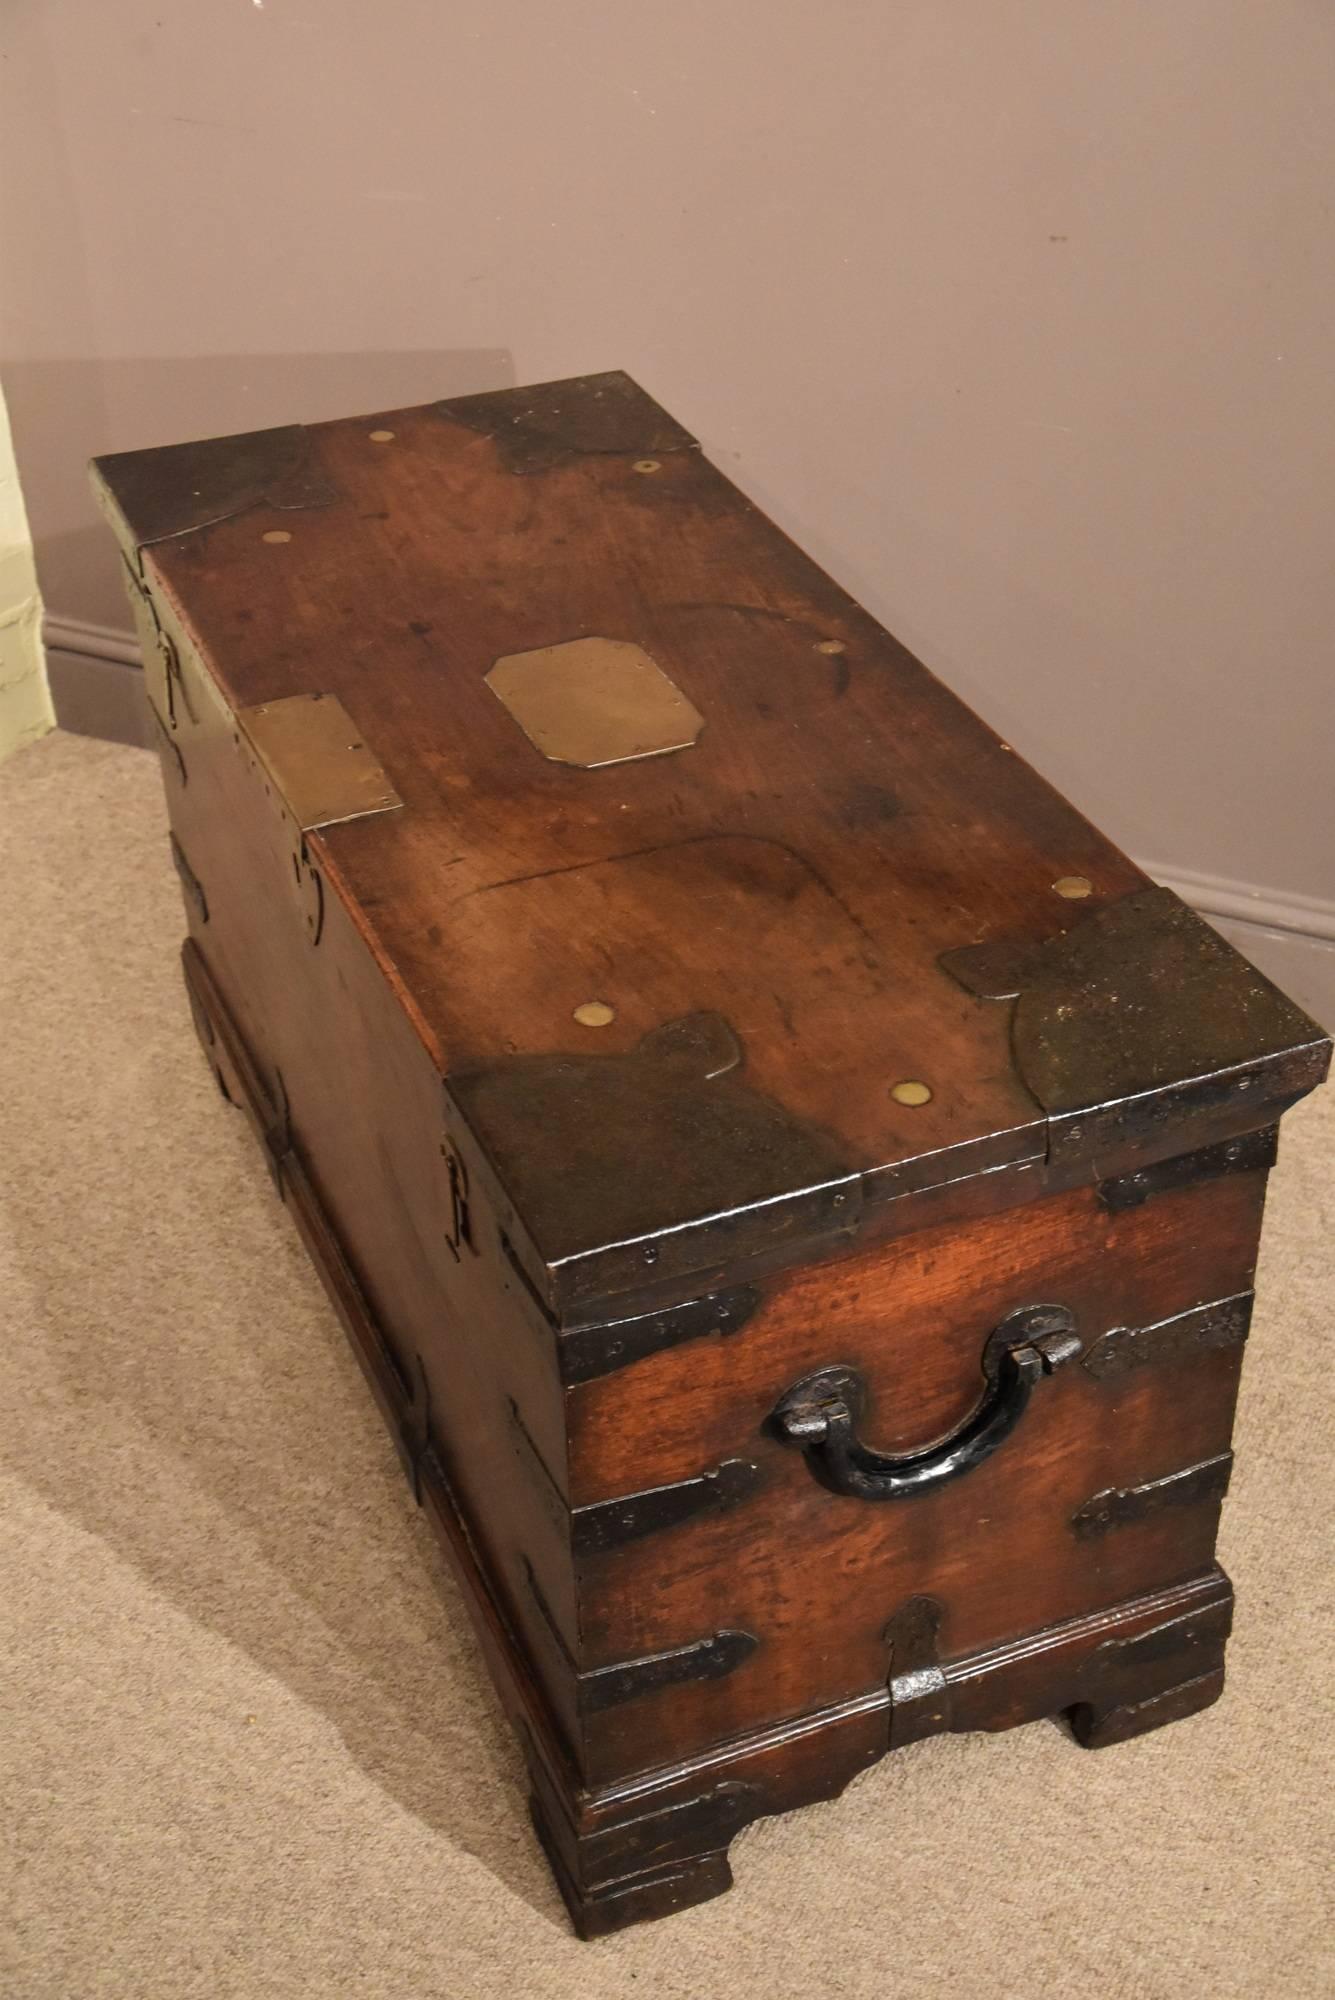 British Indian Ocean Territory Handsome Anglo Indian Teak and Iran Bound Trunk